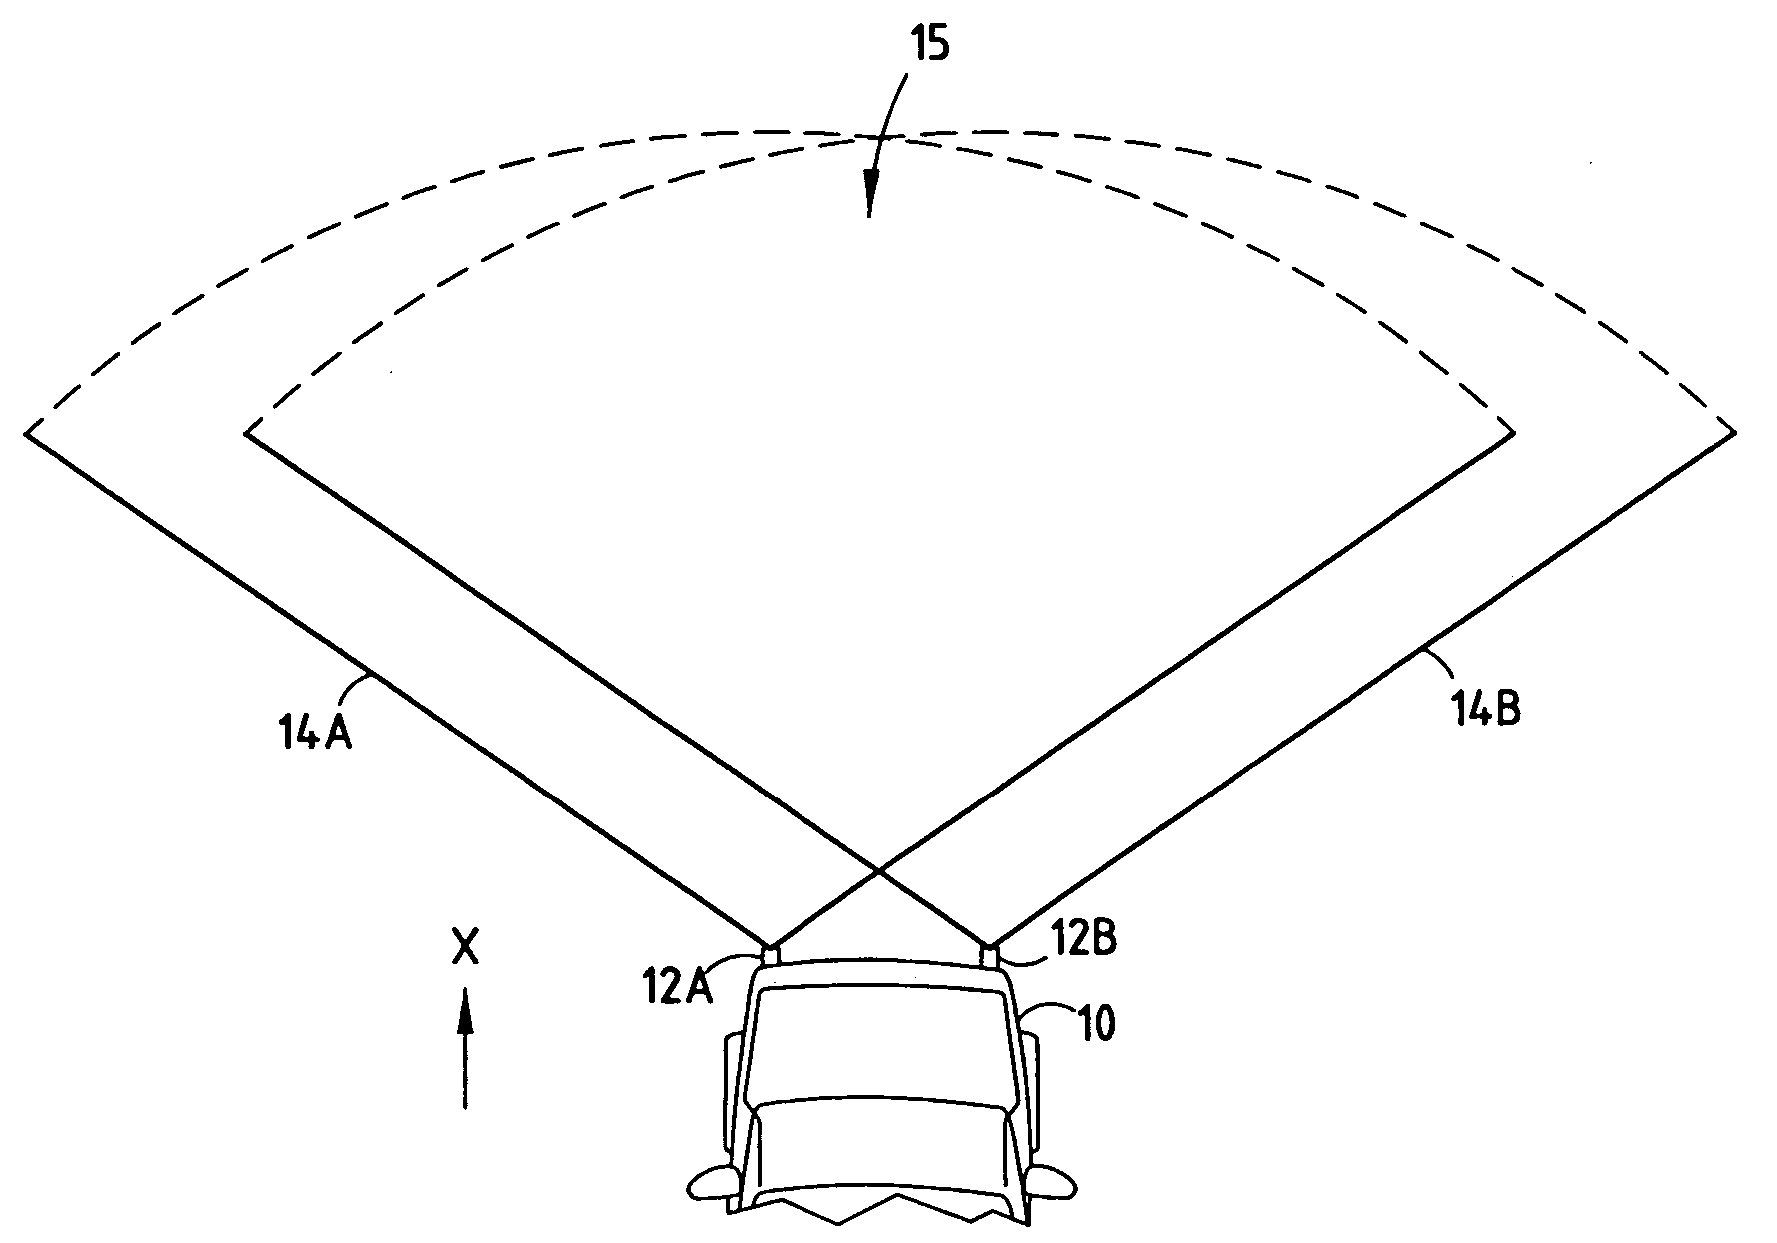 Collision detection system and method of estimating target crossing location